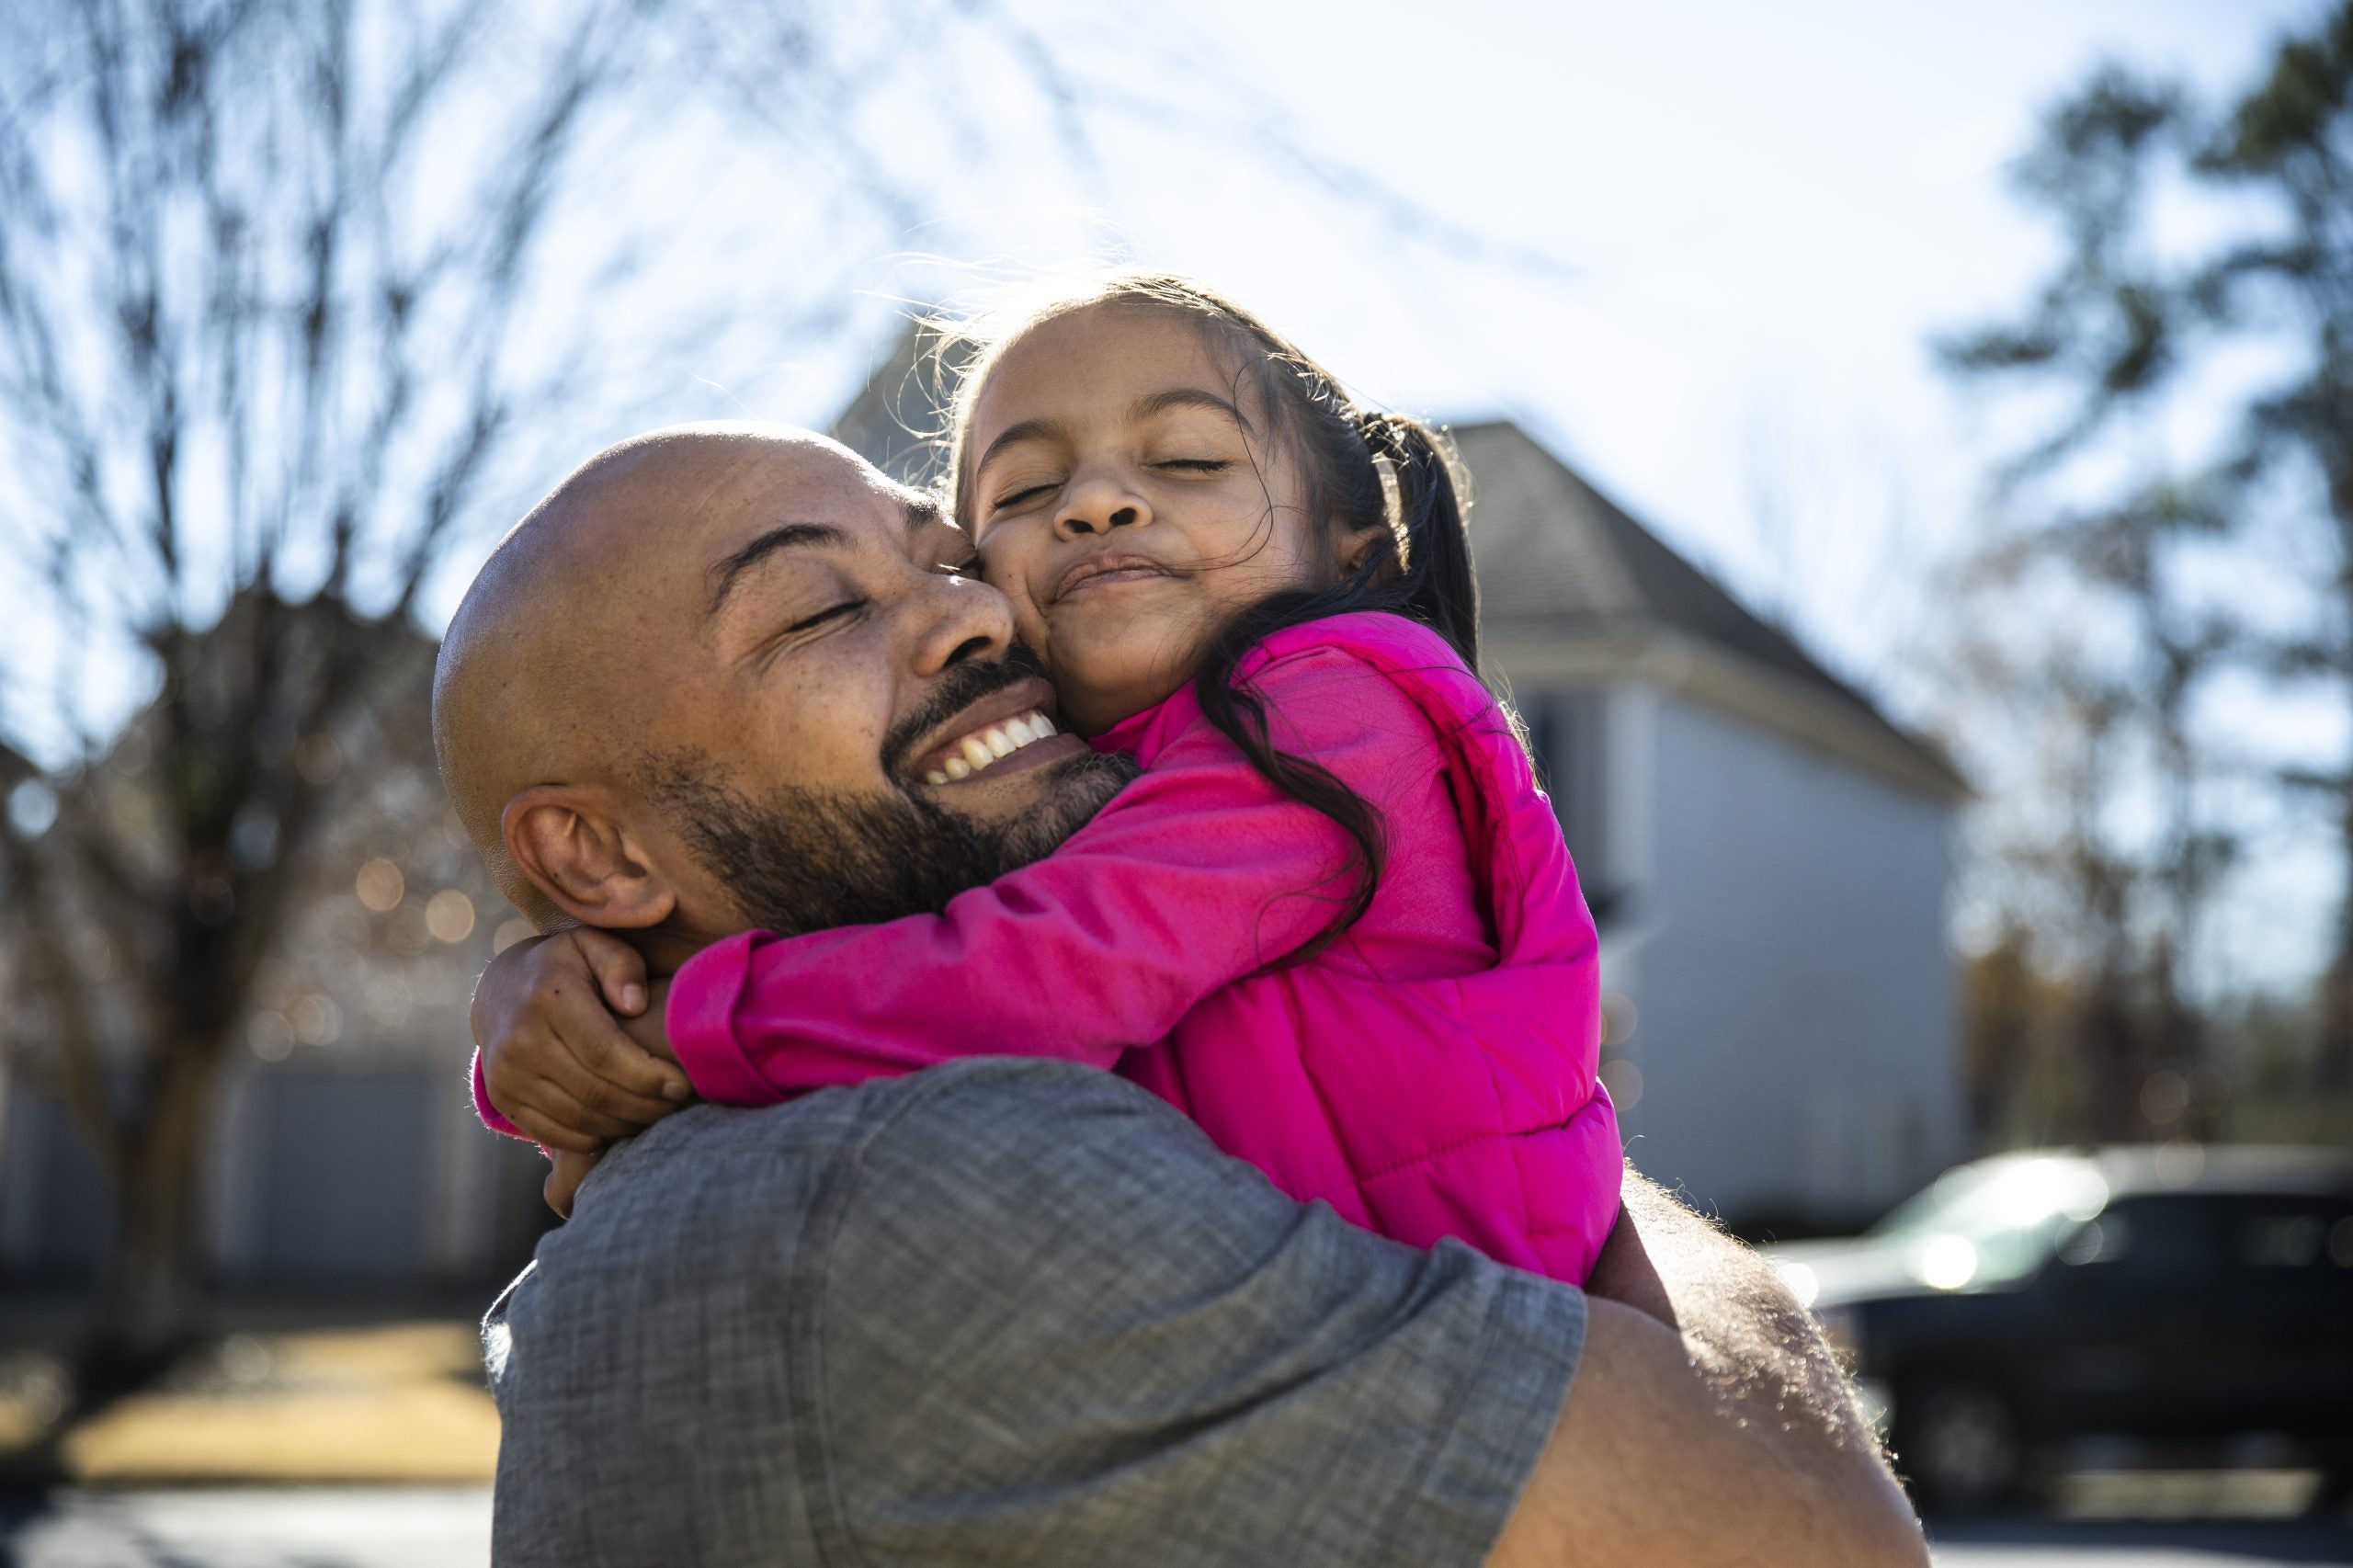 BLK Dating App Celebrates Black Single Fathers With An Empowering Campaign For Father's Day